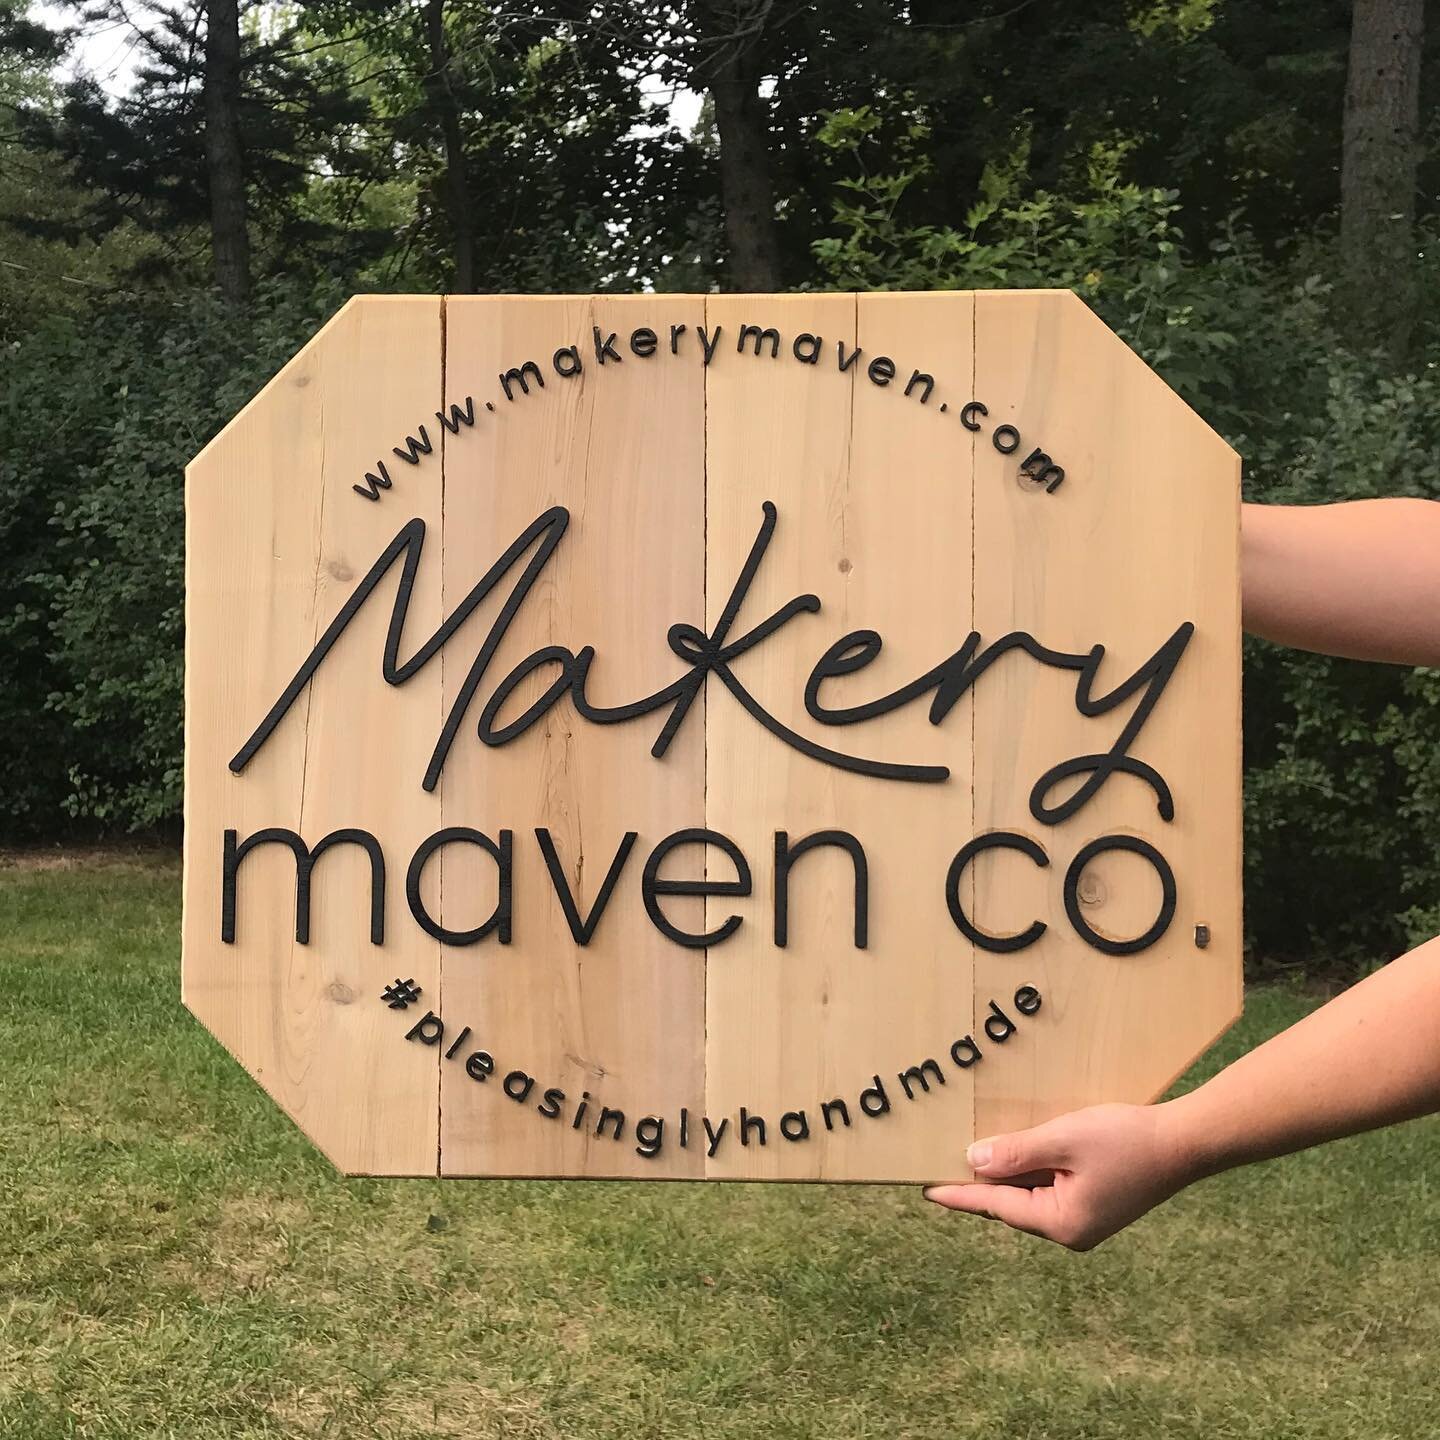 Without further ado...we introduce to you our new name and brand! 

We are MAKERY MAVEN CO.
at www.makerymaven.com

Swipe for a little background on that the name means to us and how it represents our work in a more wholistic way. 

#rebrand #newbusi